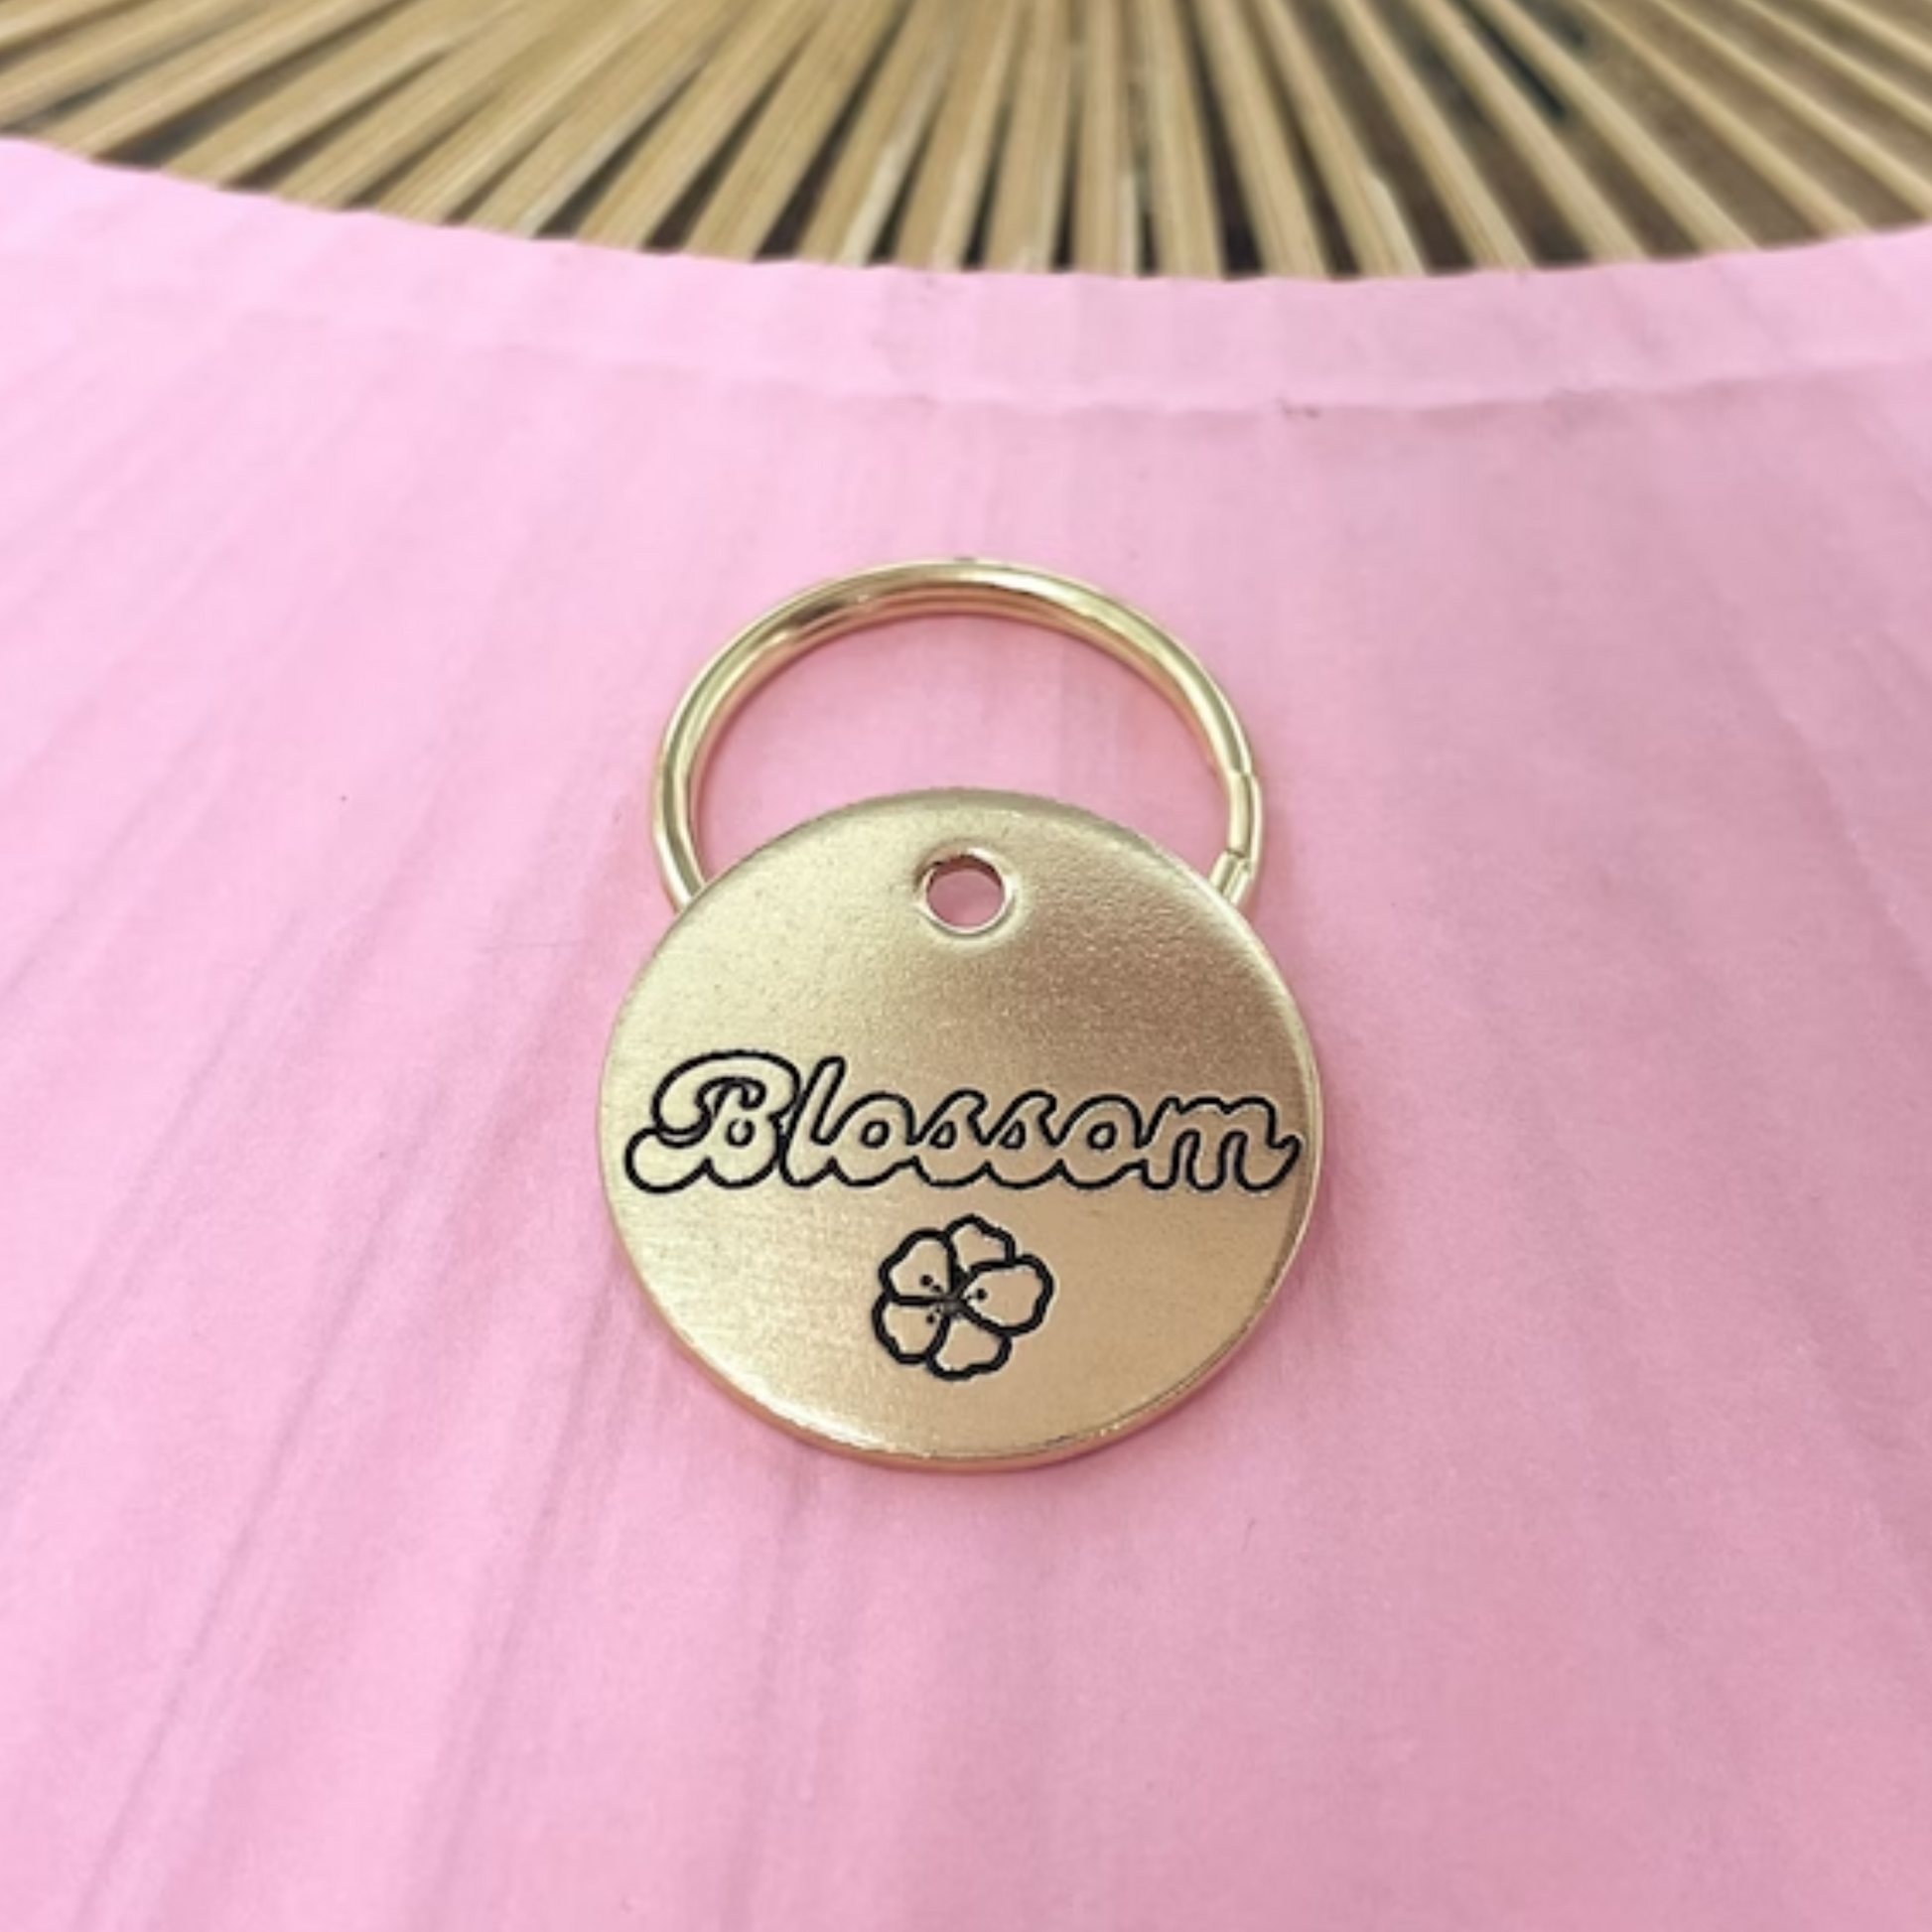 Personalized Dog Tag - Cherry Blossom Dog Tag Design Engraved - Cat ID Tag - Dog Collar Tag - Custom Dog Tag - Personalized Tag - Pet ID Tag - Flower Dog Tag - Cherry Blossom - Flower - Dog Gear - Dog Accessories - Pet Accessories - Flower